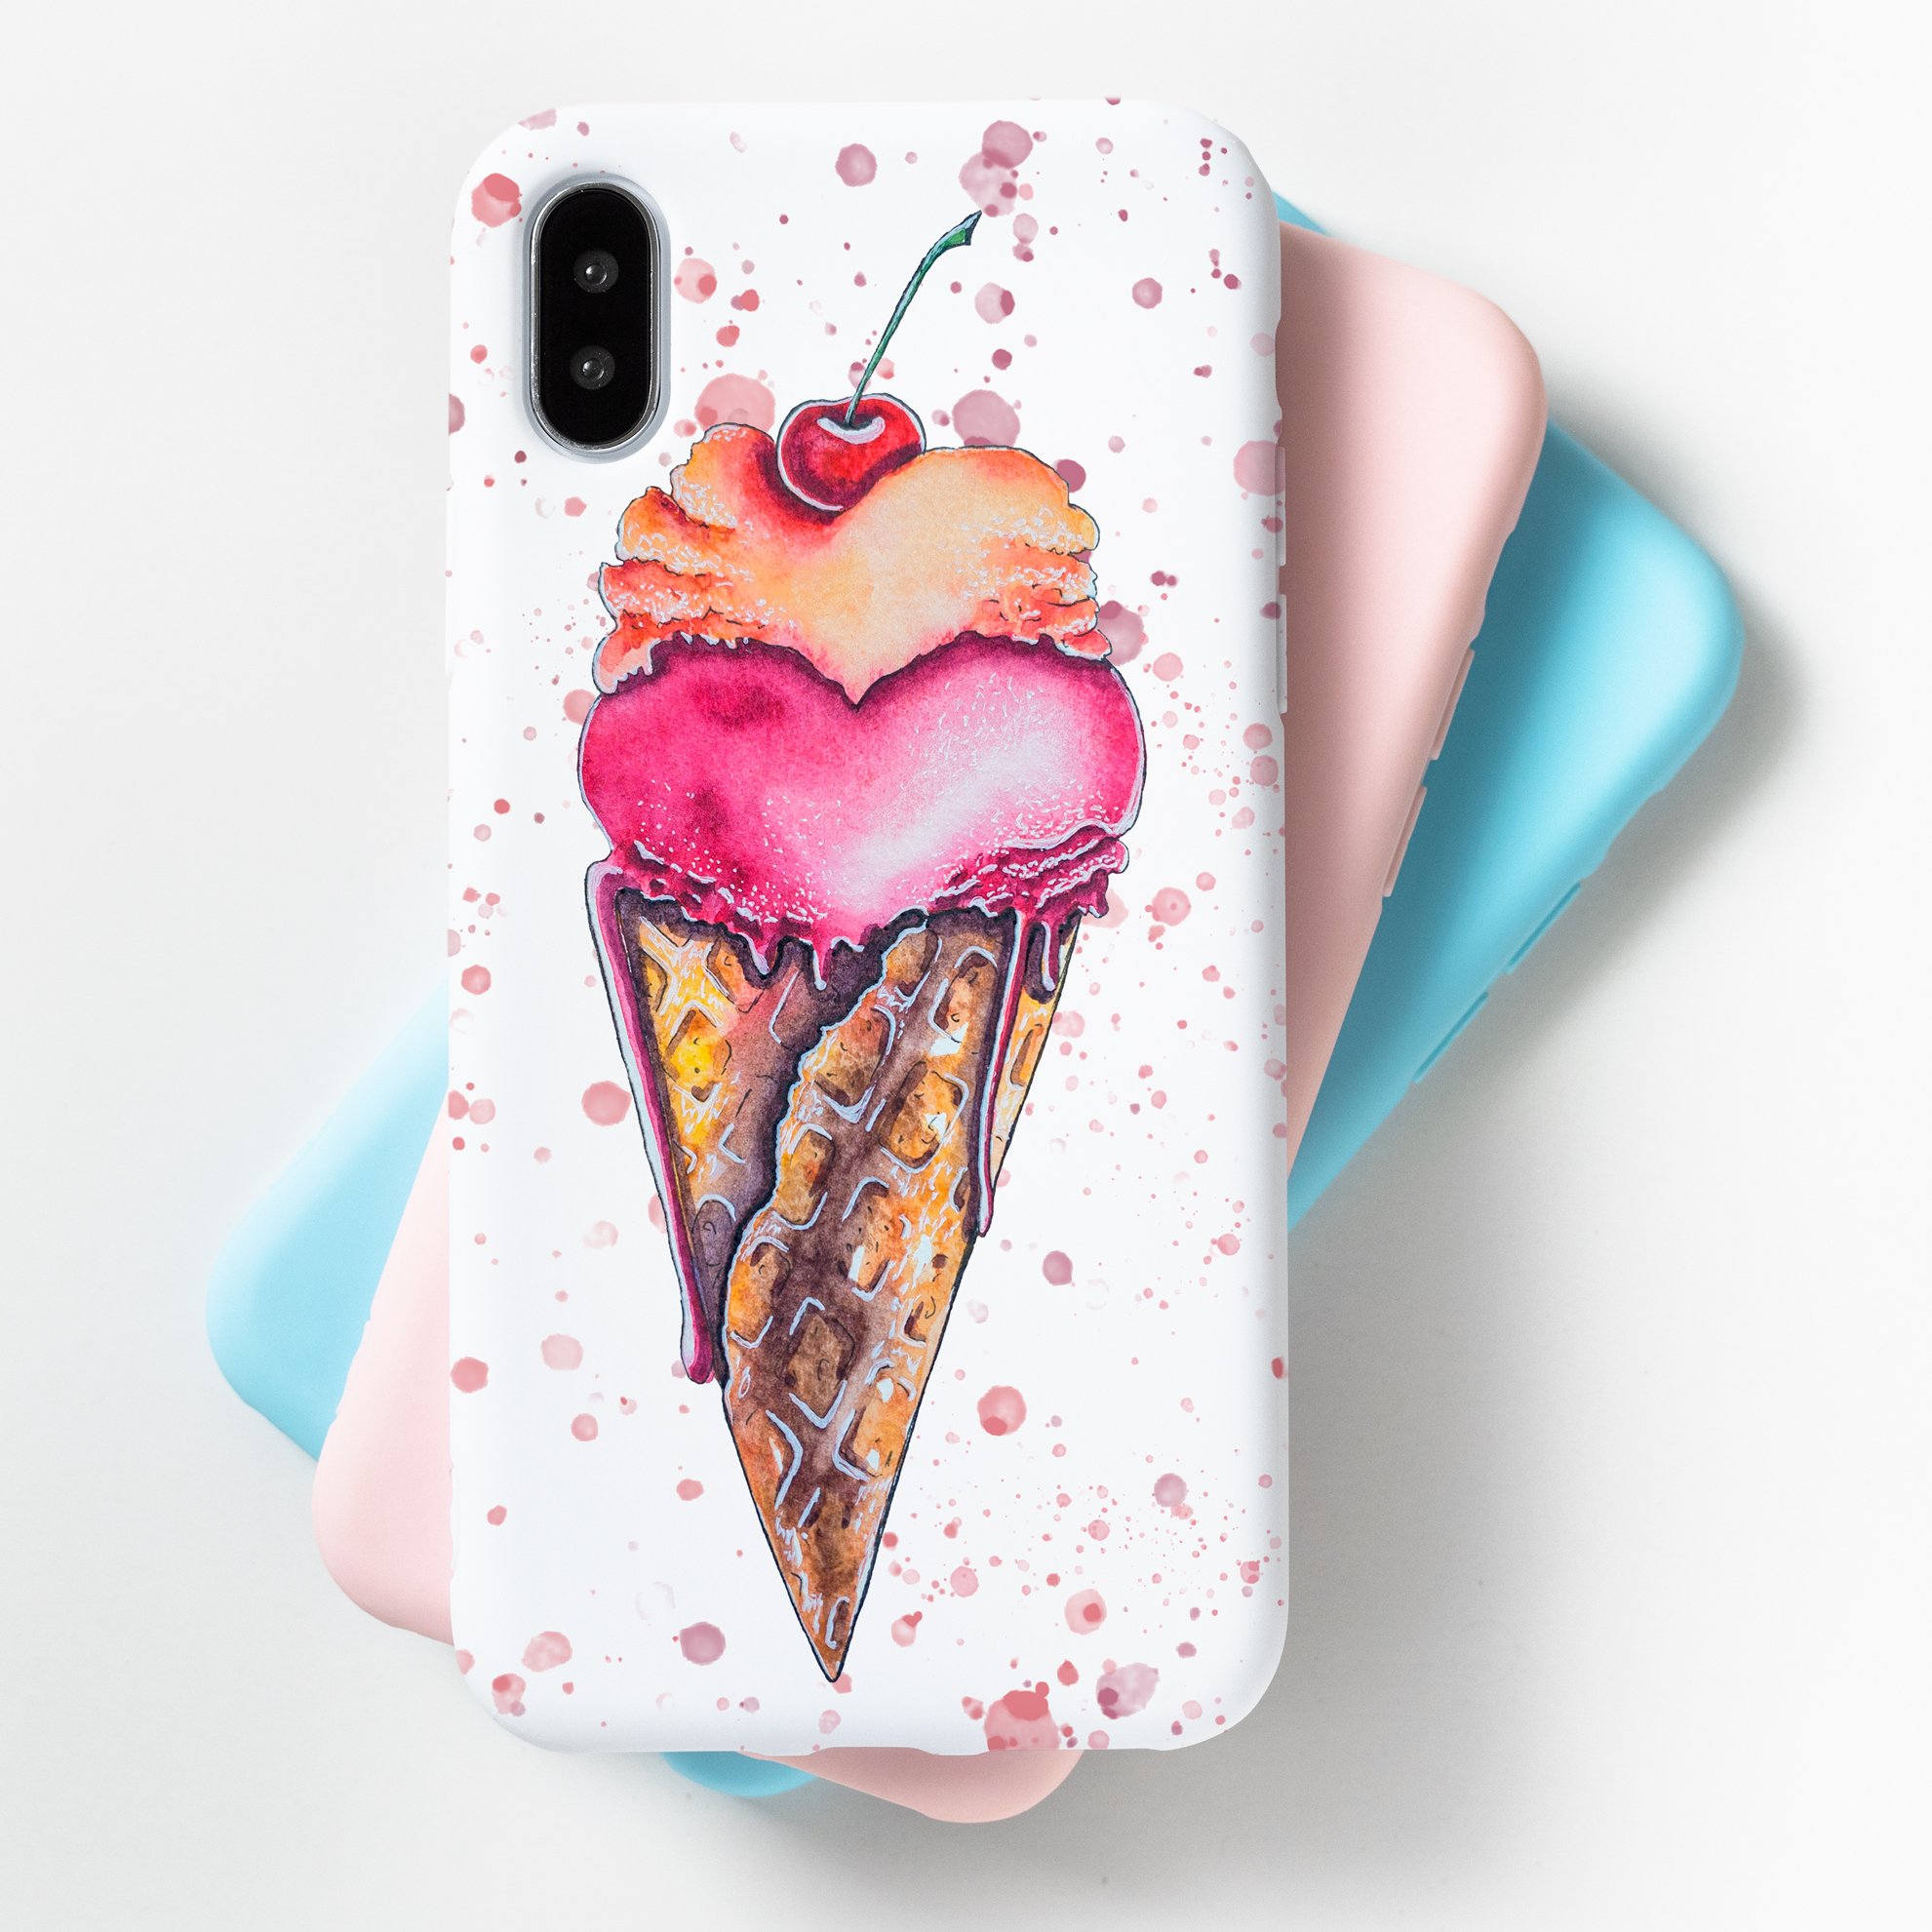 Diverse of phone case with an ice cream.